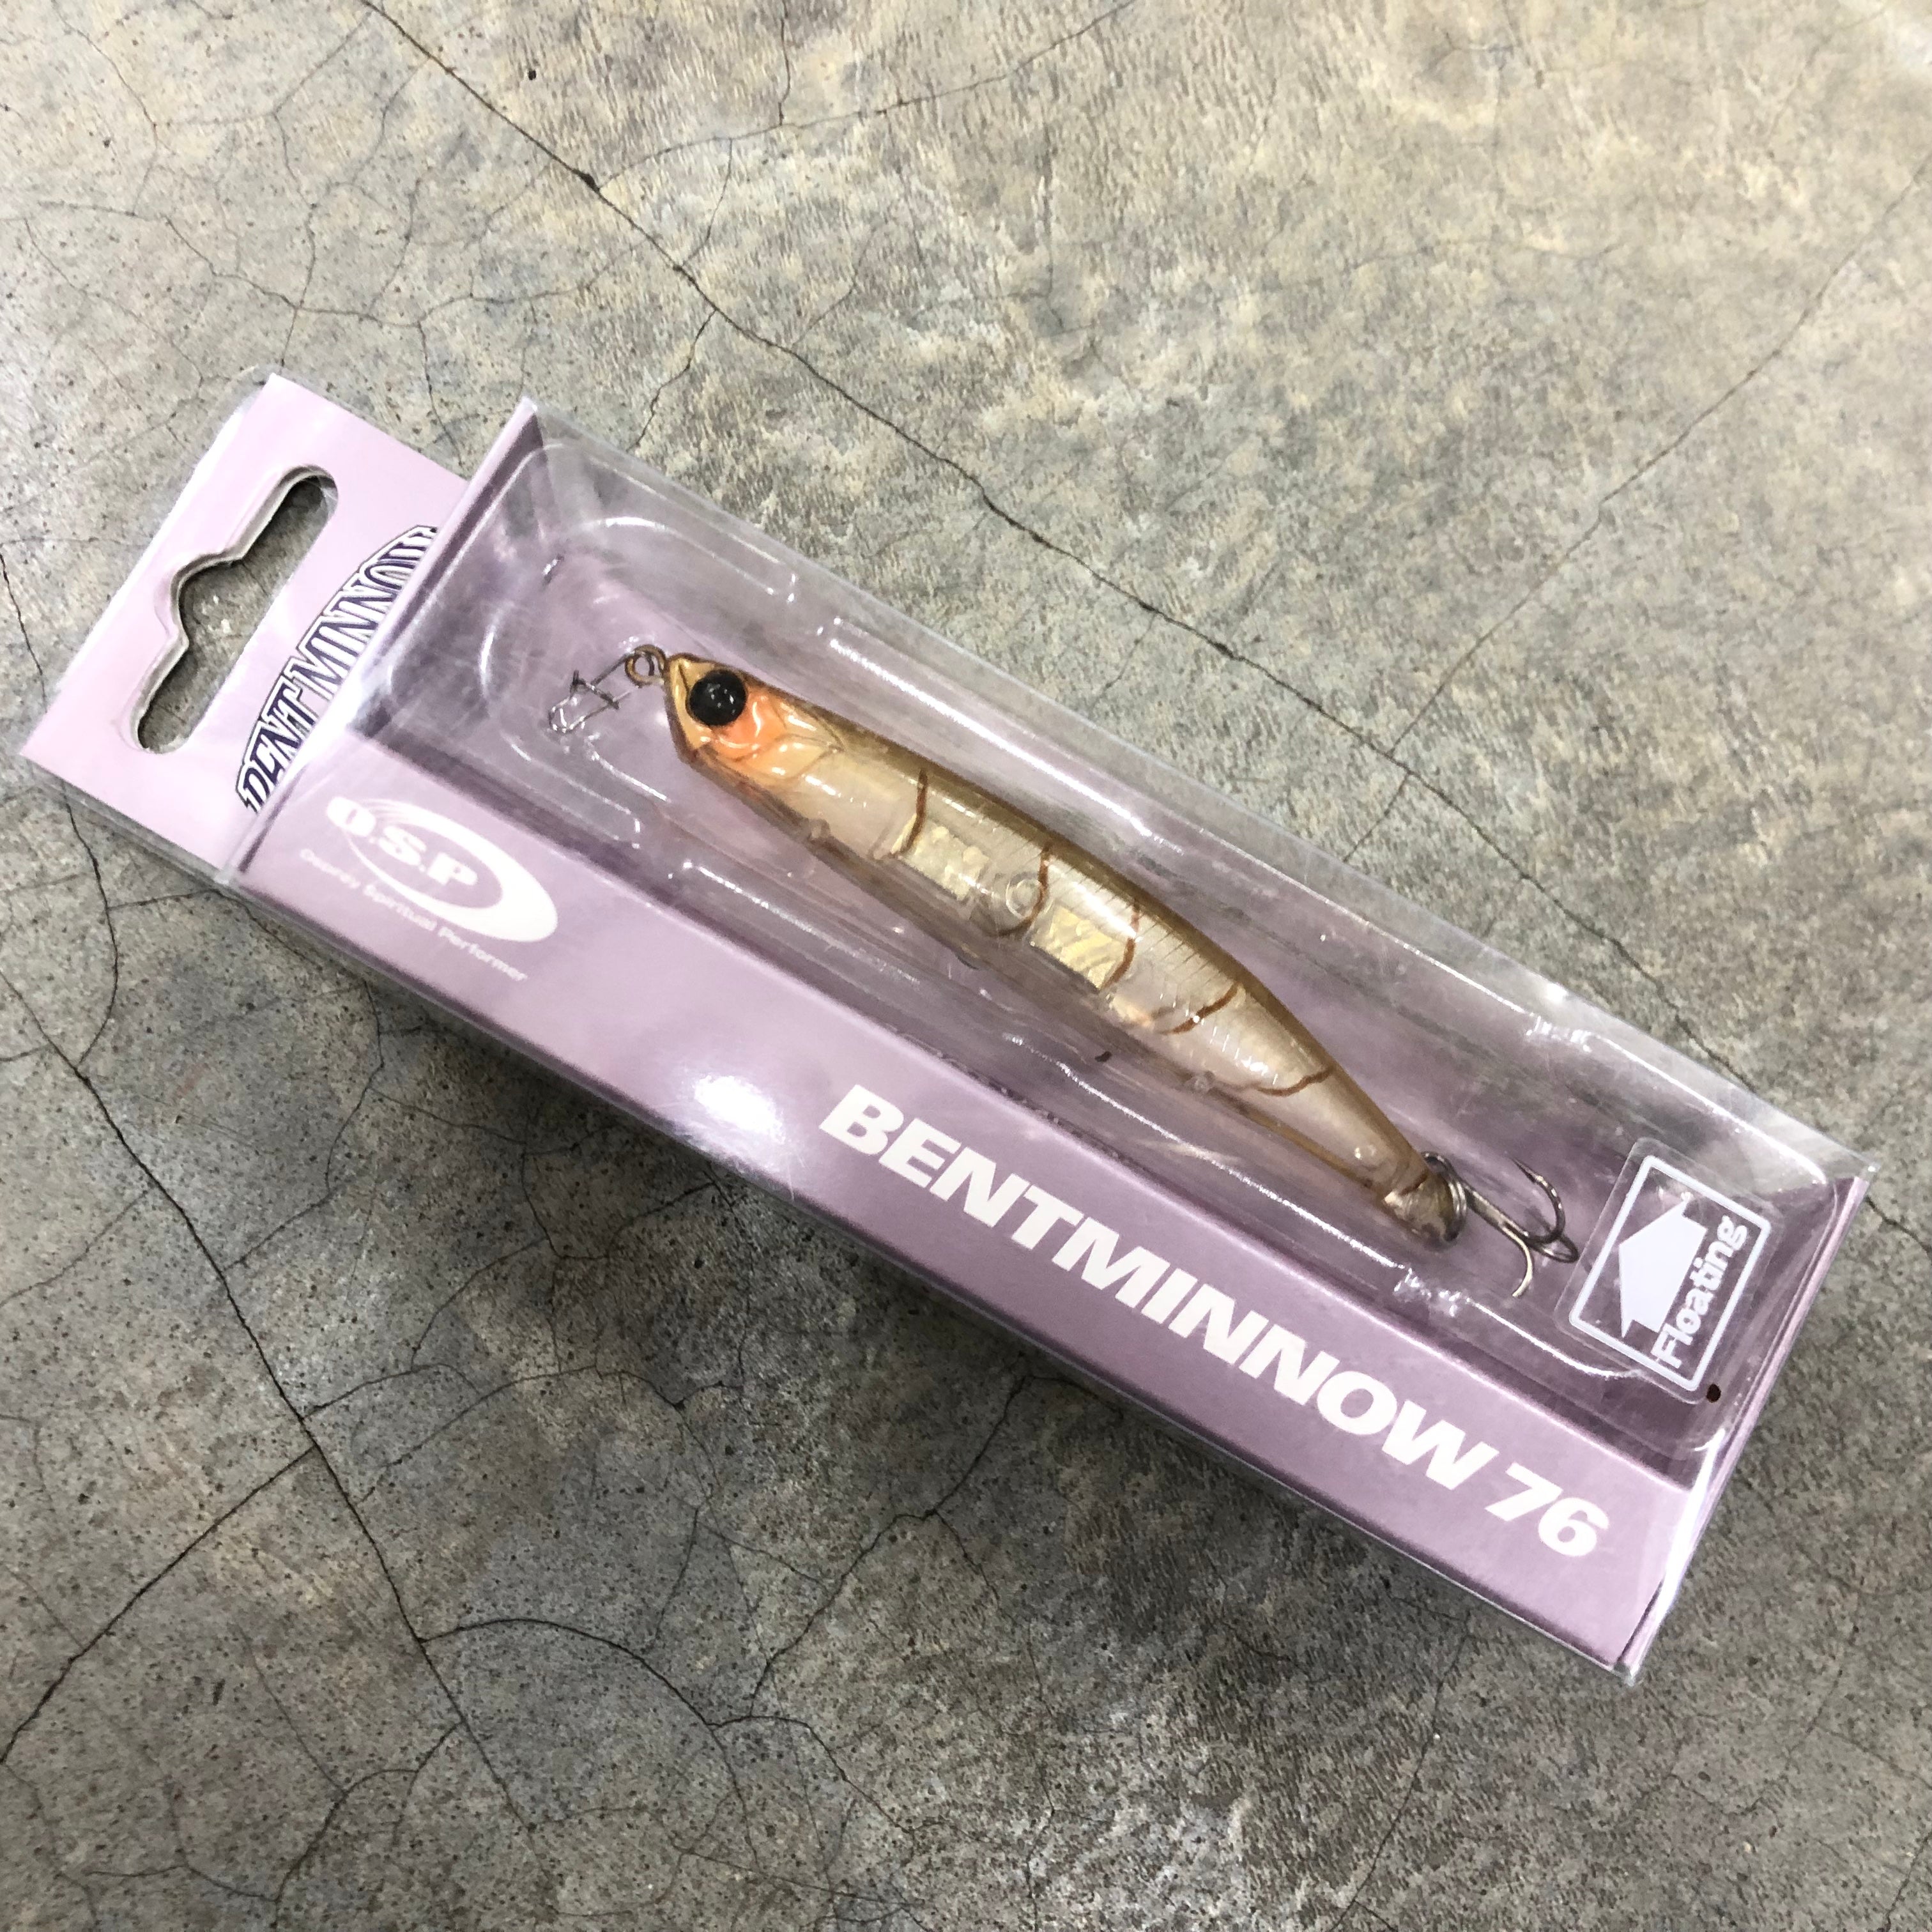 Bent Minnow 76F – Anglers Central